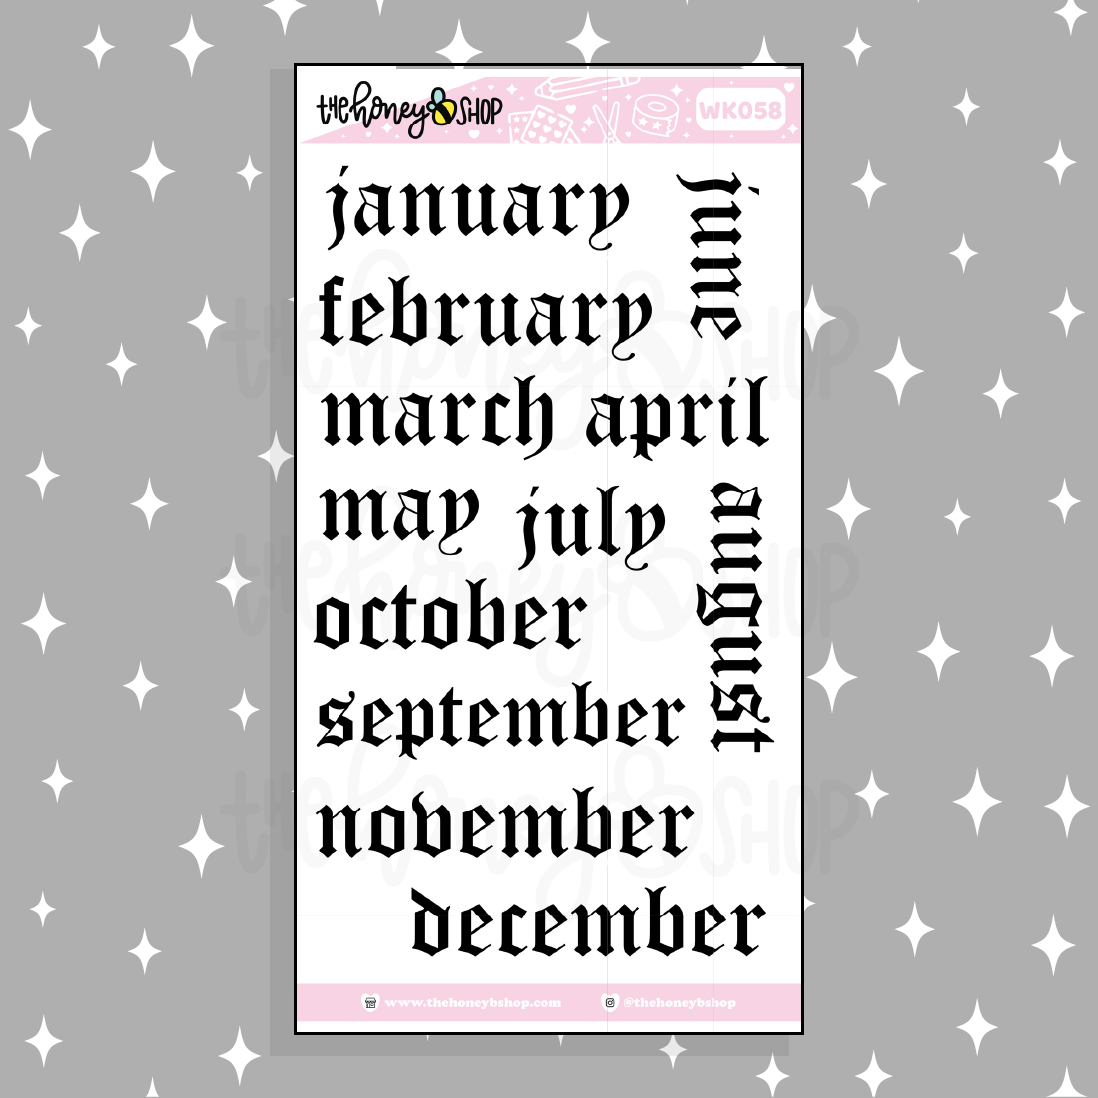 Old English Months of the Year Doodle Sticker